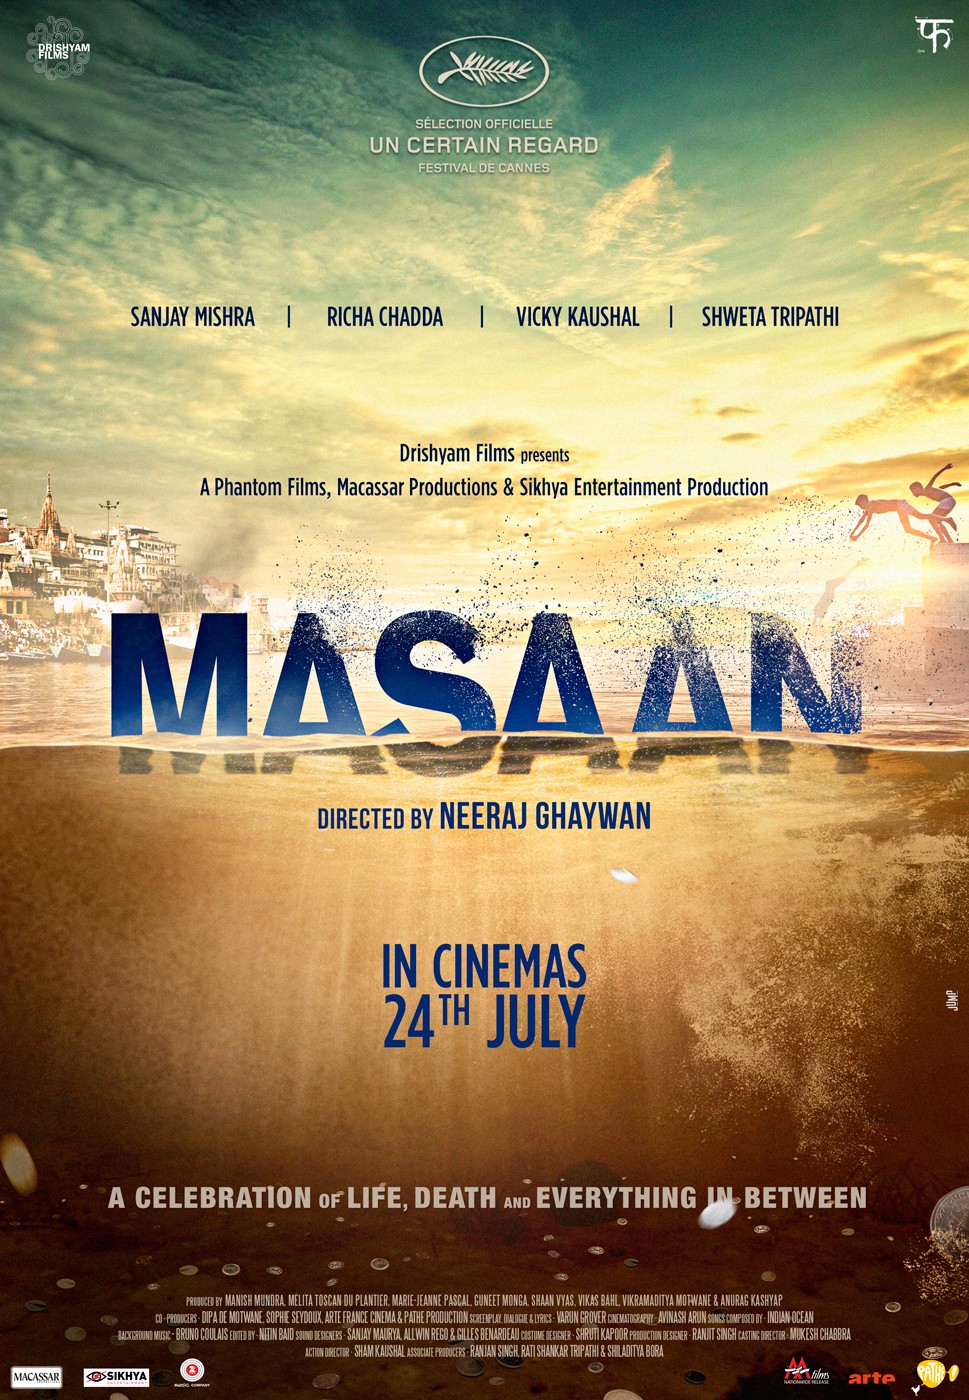 Extra Large Movie Poster Image for Masaan (#2 of 3)